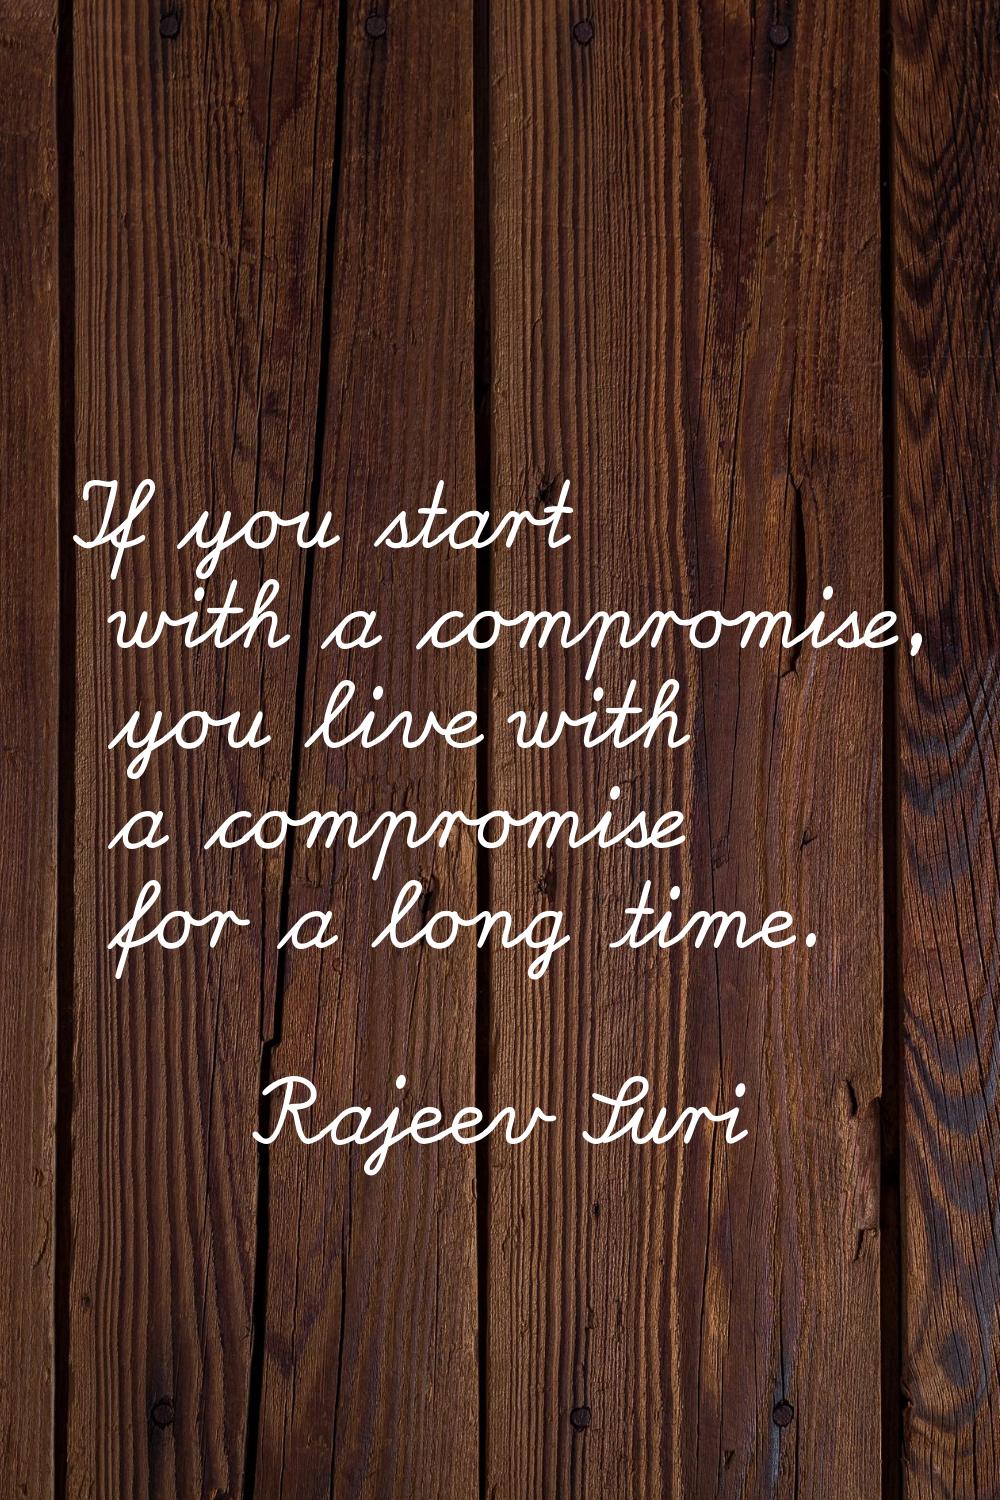 If you start with a compromise, you live with a compromise for a long time.